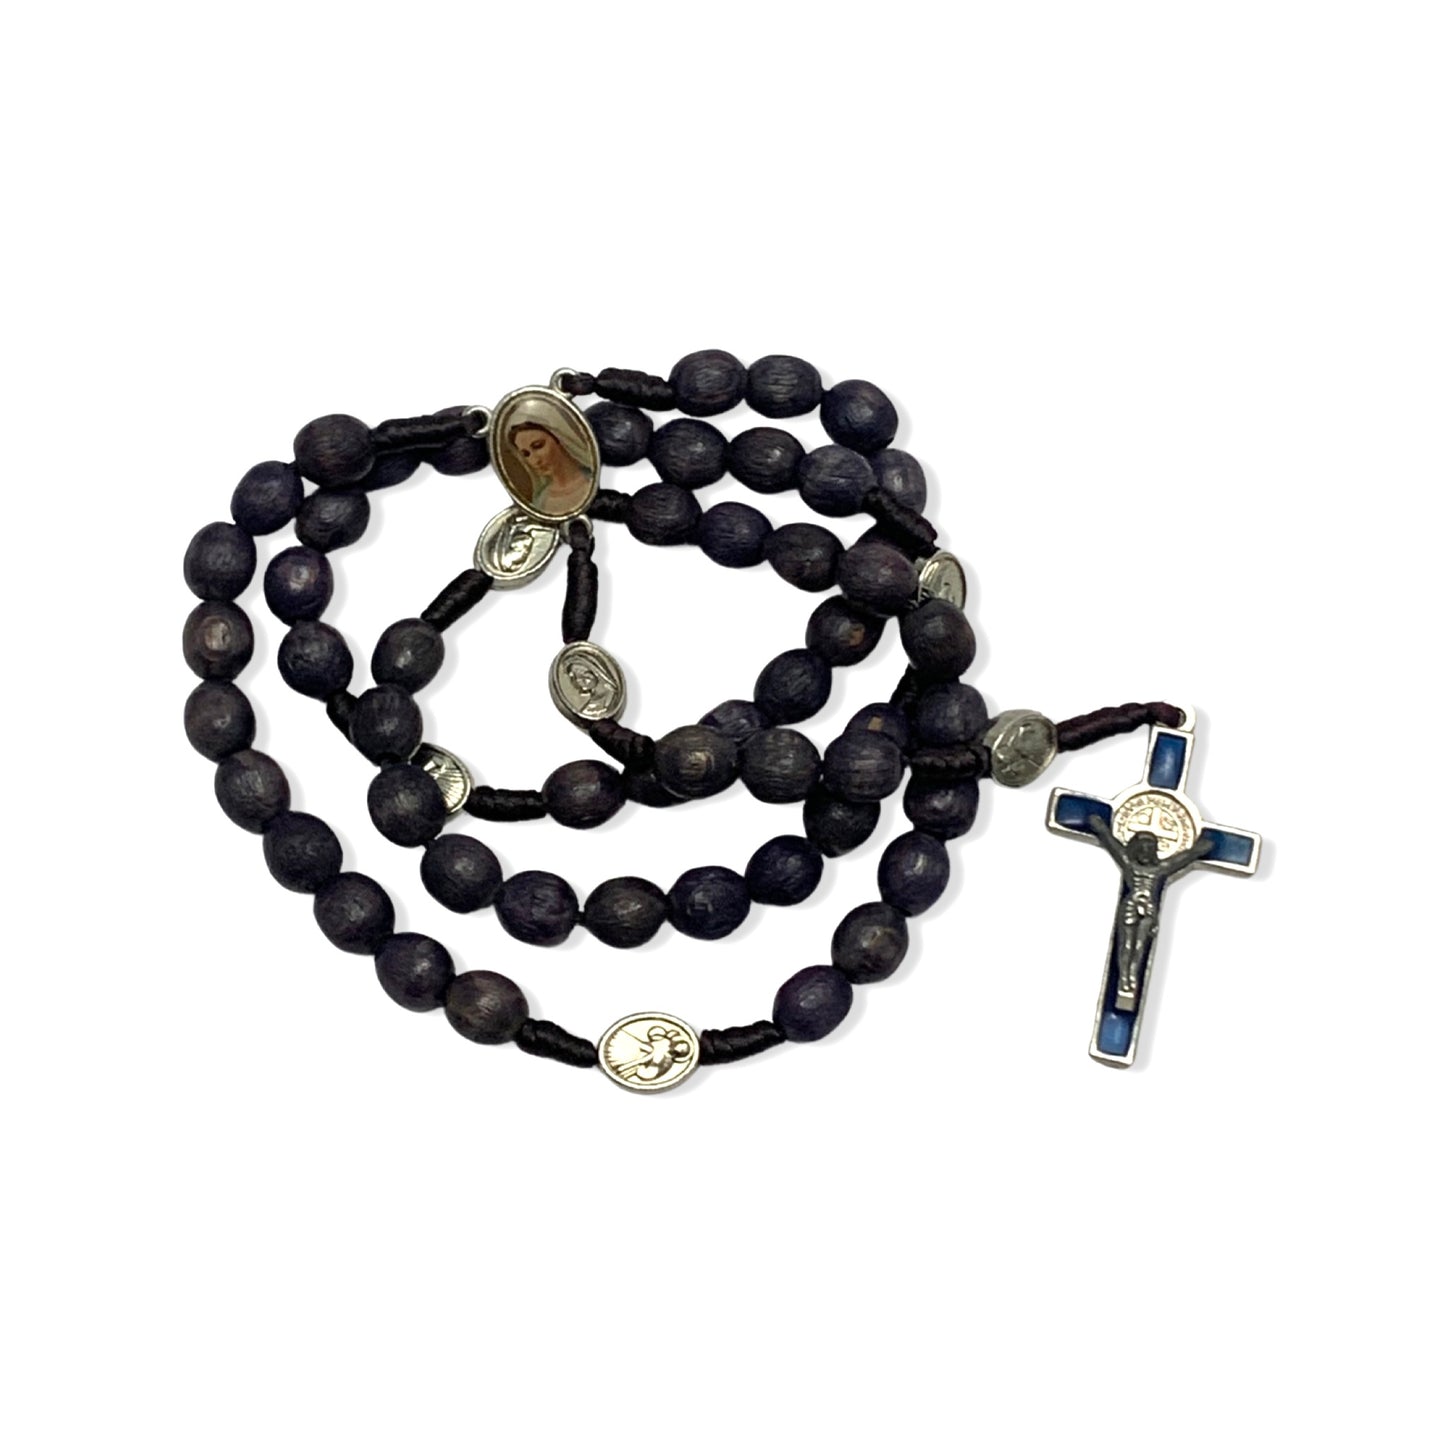 Queen of Peace Rosary with St. Benedict Crucifix